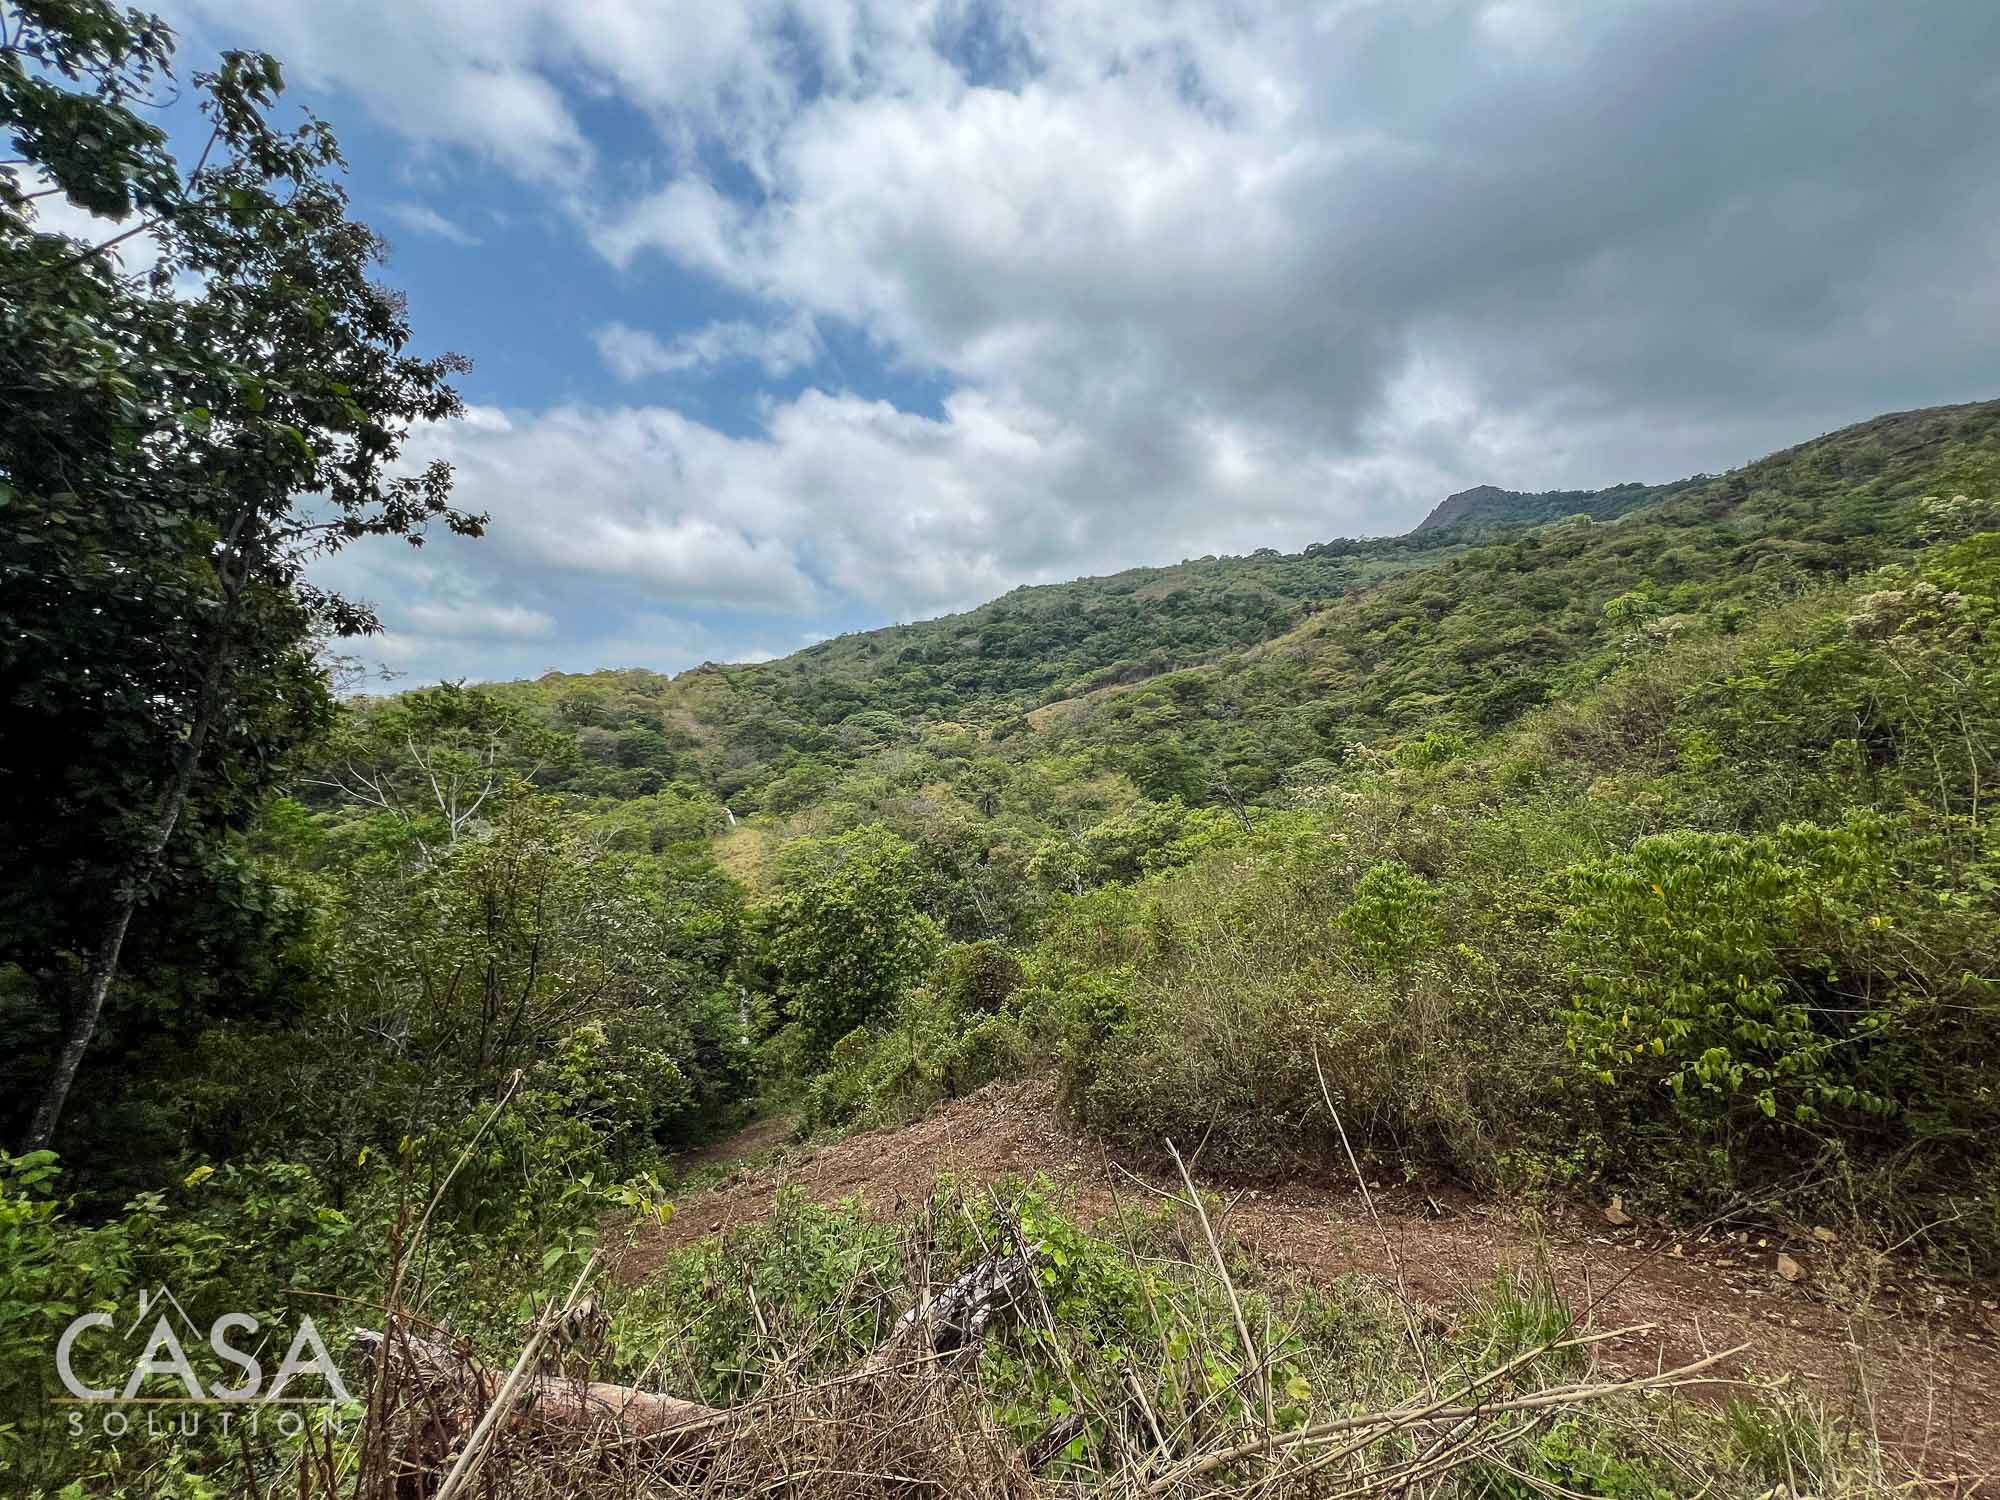 Mountain View Lot for Sale in El Cope, Boquete, Chiriquí. Suitable for Cattle Farming or Coffee Cultivation